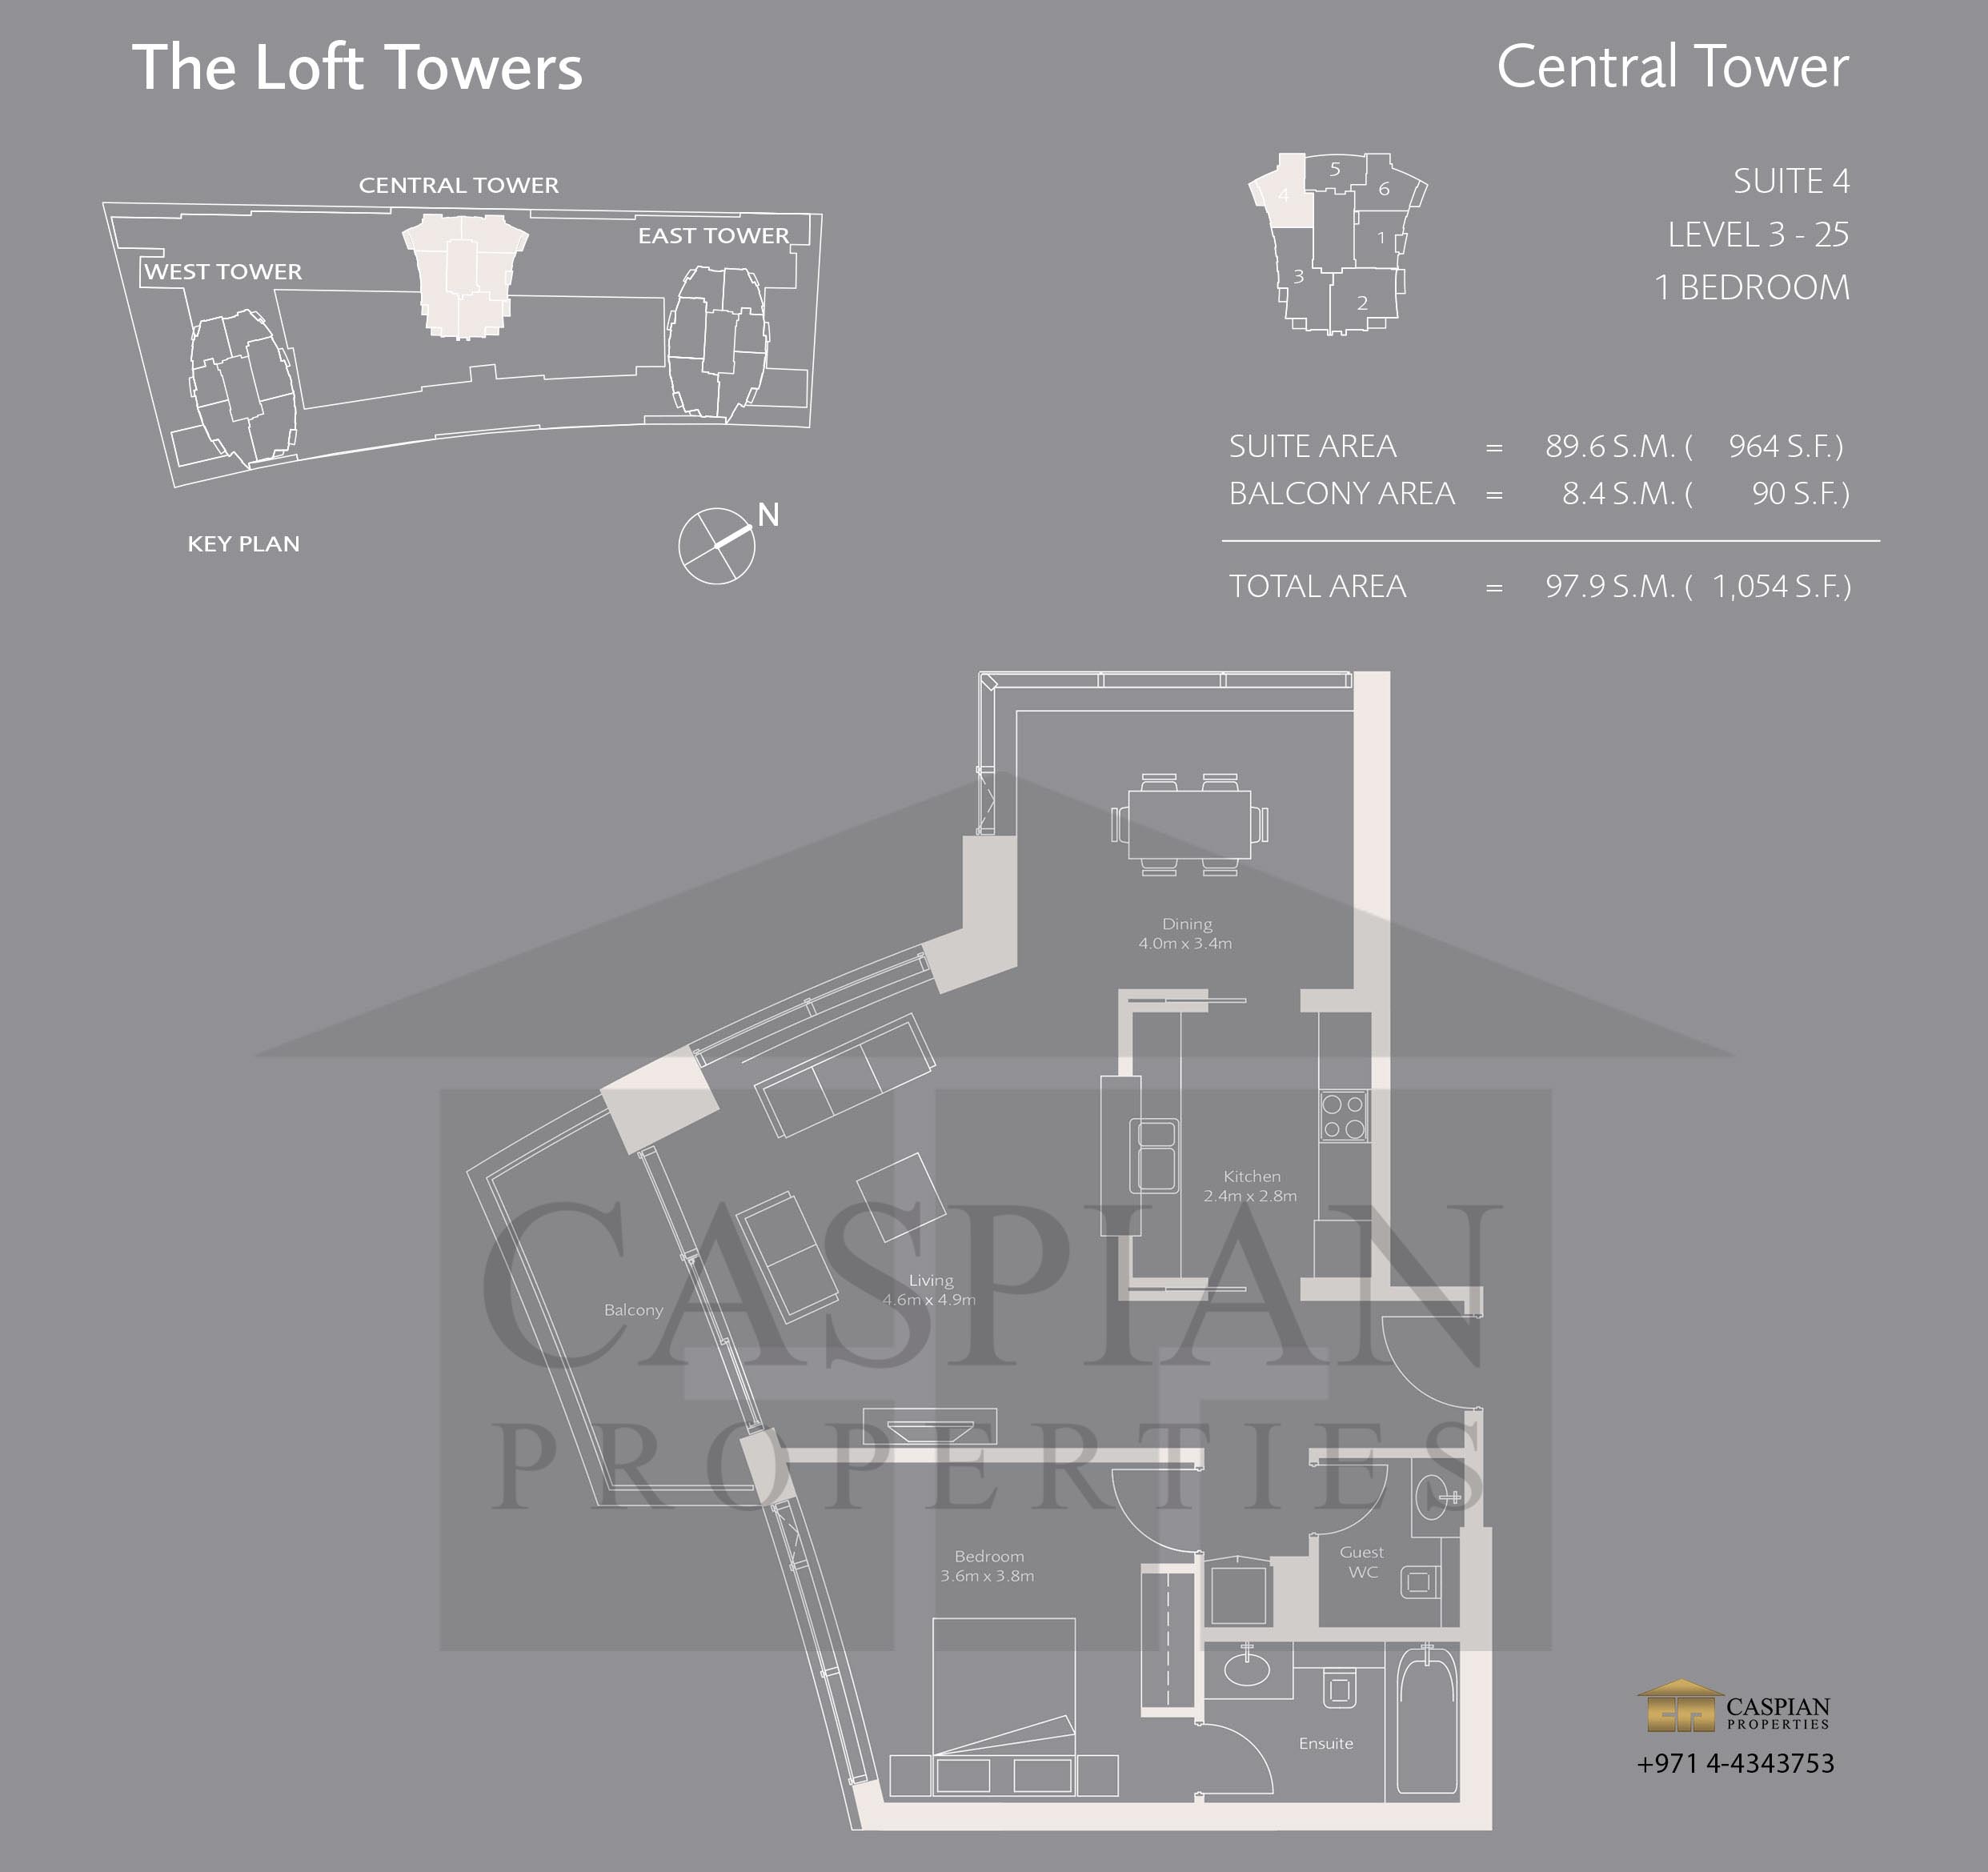 The Lofts Central Floor Plans